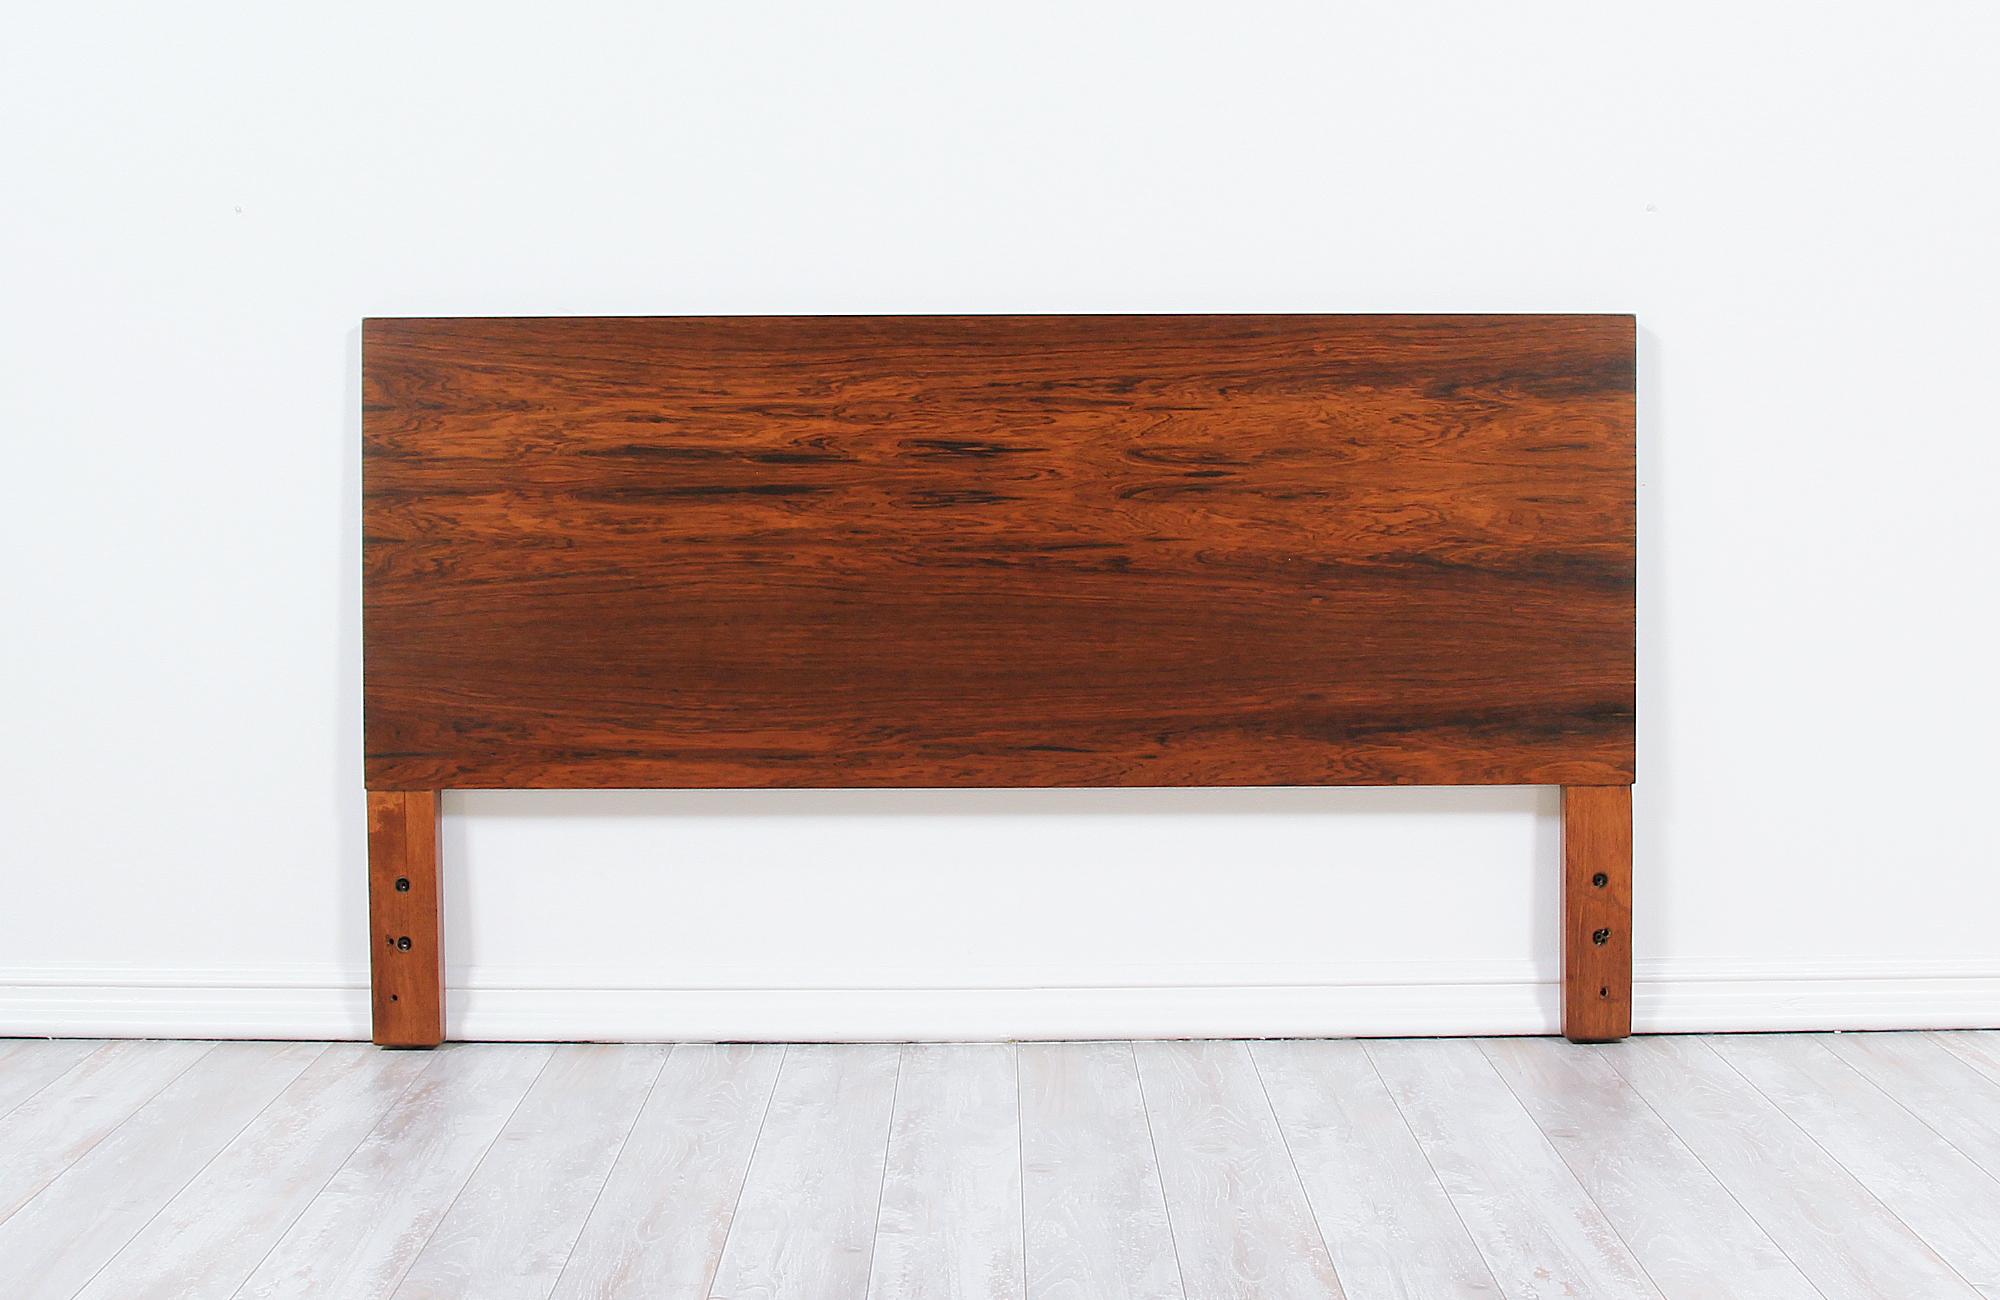 Gorgeous headboard designed by George Nelson for Herman Miller in the United States, circa 1950s. Just like his other pieces from his ‘Thin Edge’ collection, this beautiful headboard is quality crafted in Brazilian rosewood with a richly grained